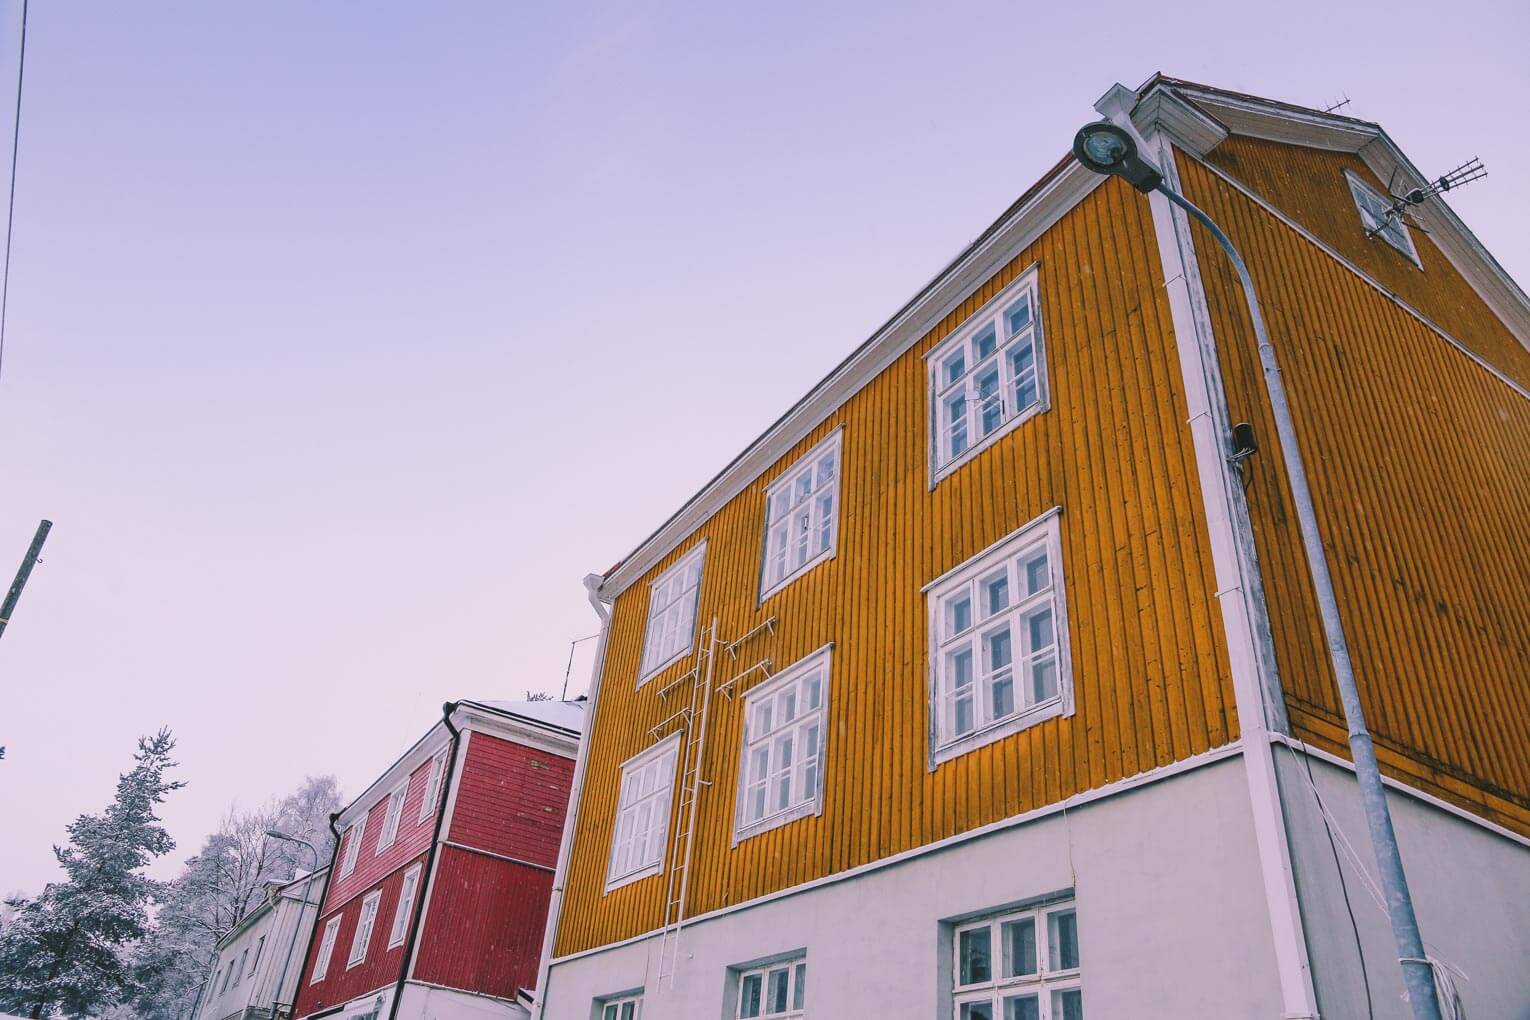 "Pispala wooden houses Things to do in Tampere on a winter holiday in Finland